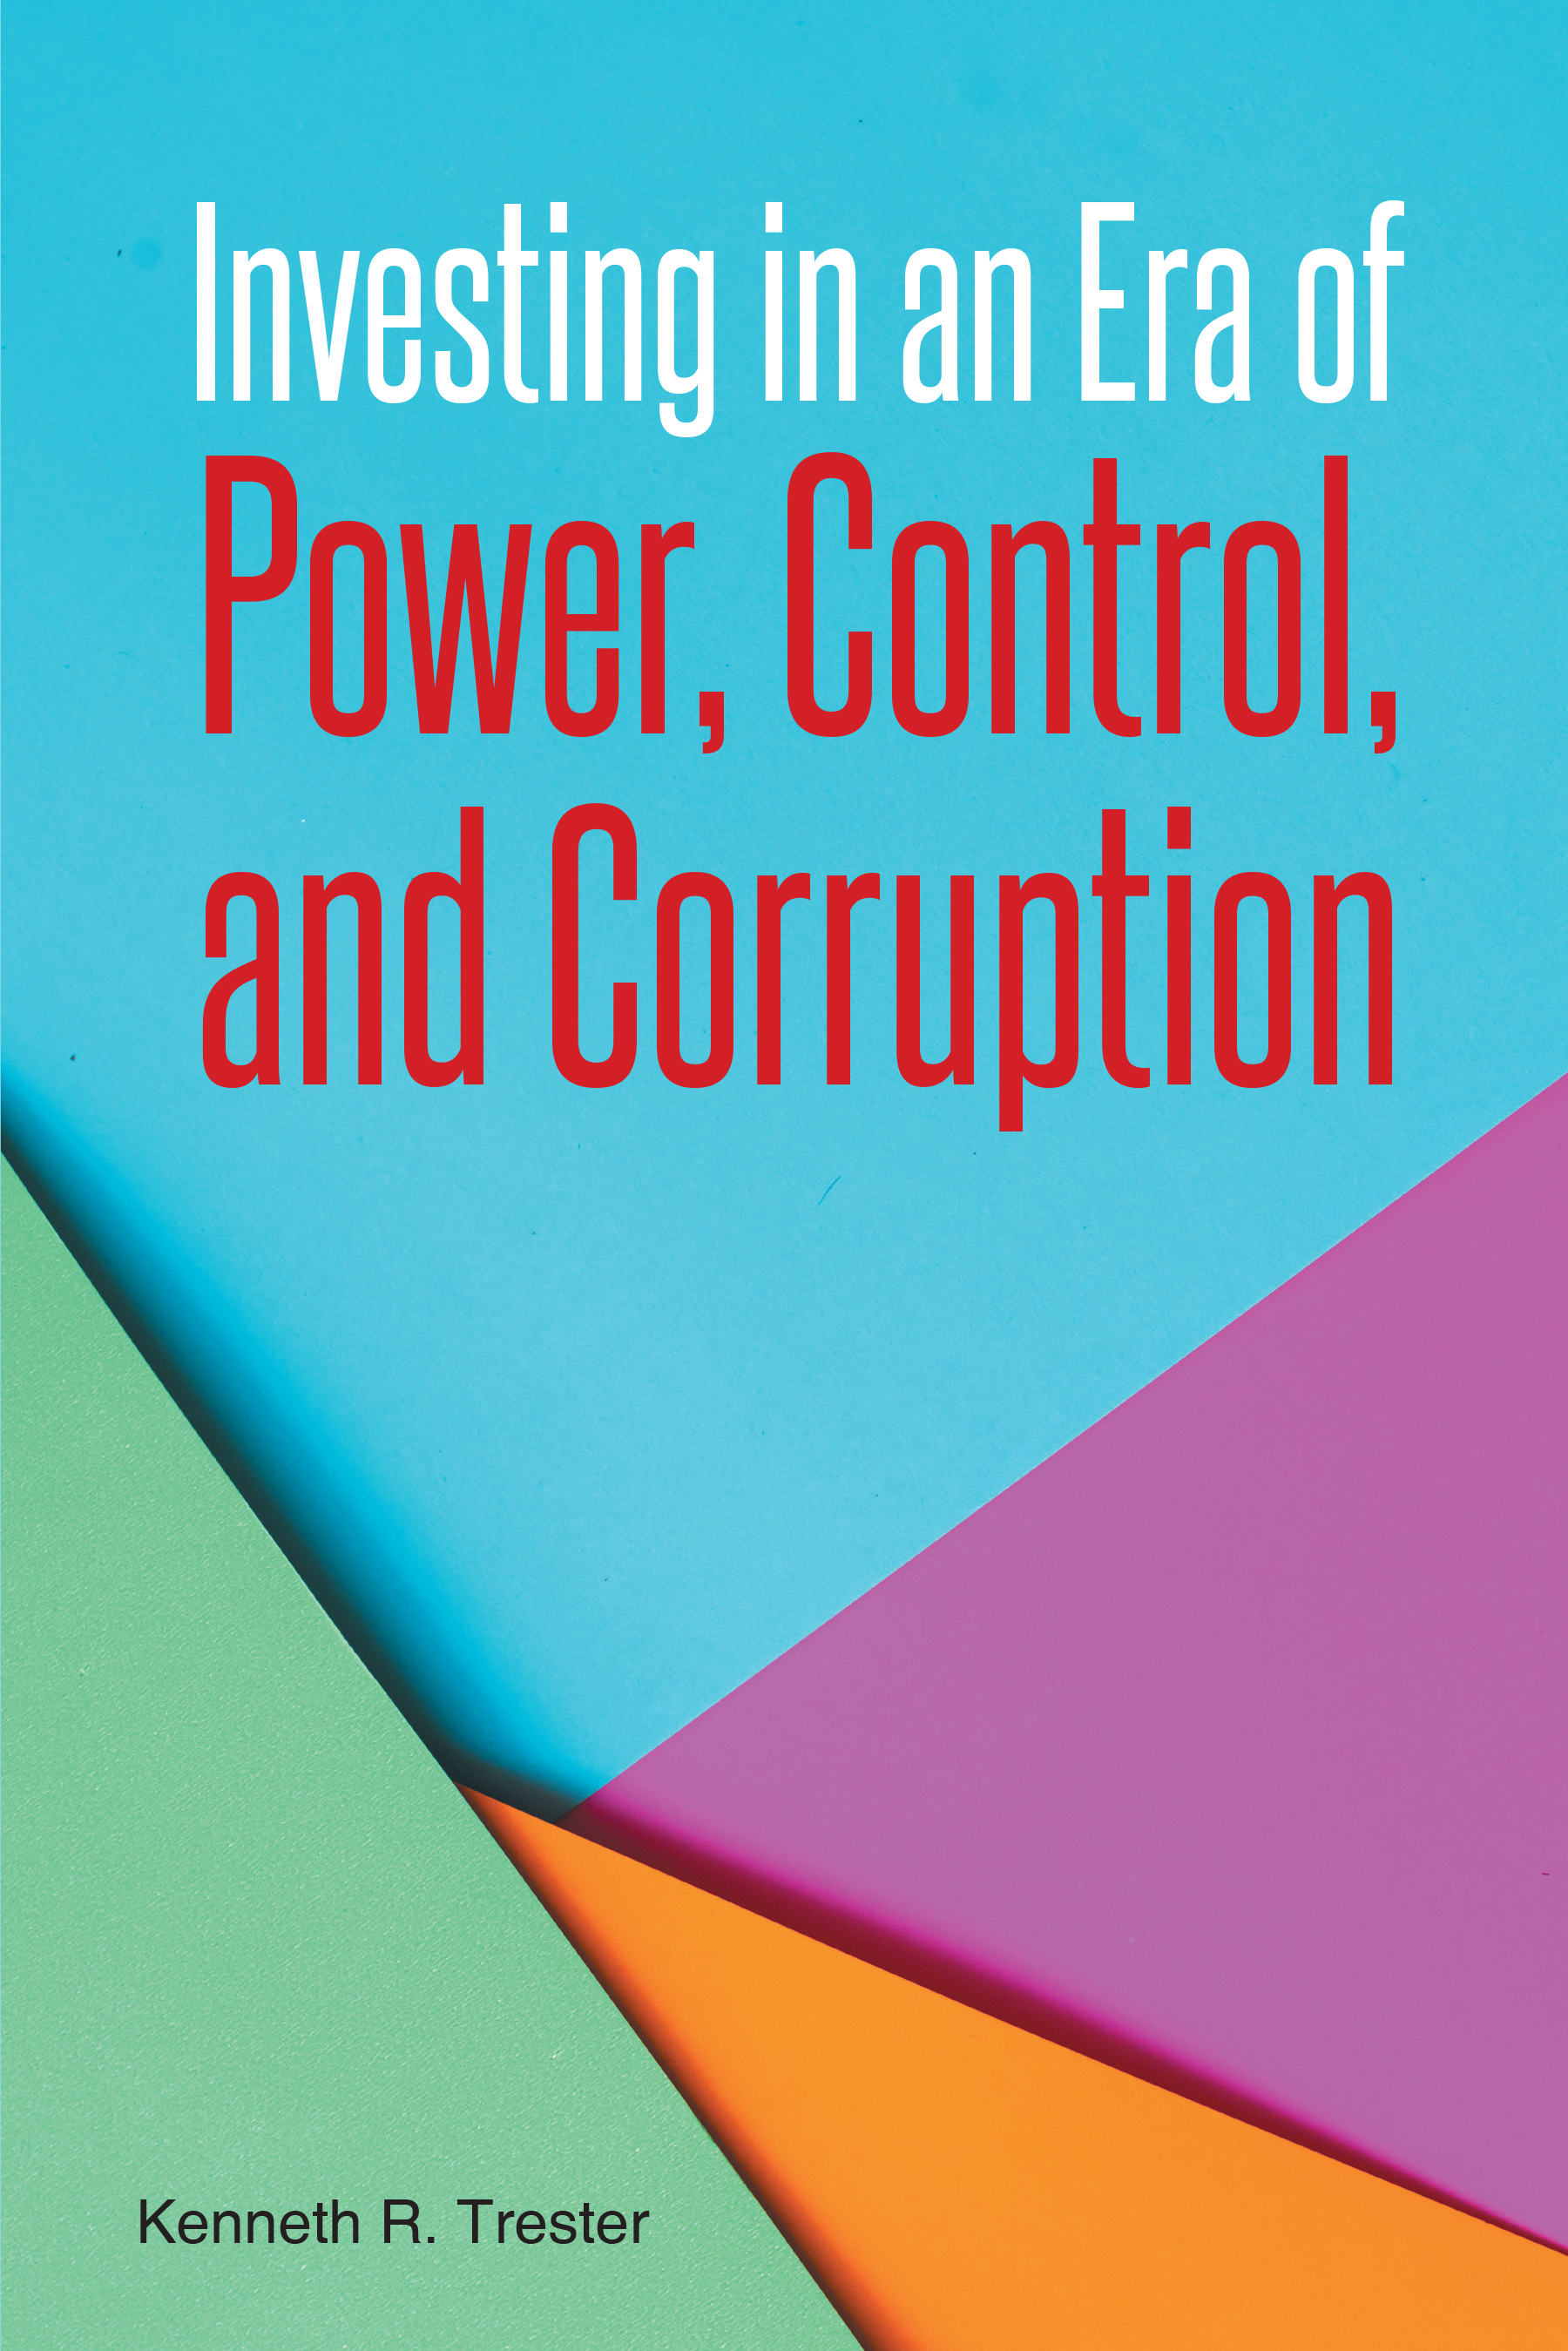 Author Kenneth R. Trester’s New Book, "Investing in an Era of Power, Control, and Corruption," Offers Strategies for Navigating Today's Complex Financial Markets